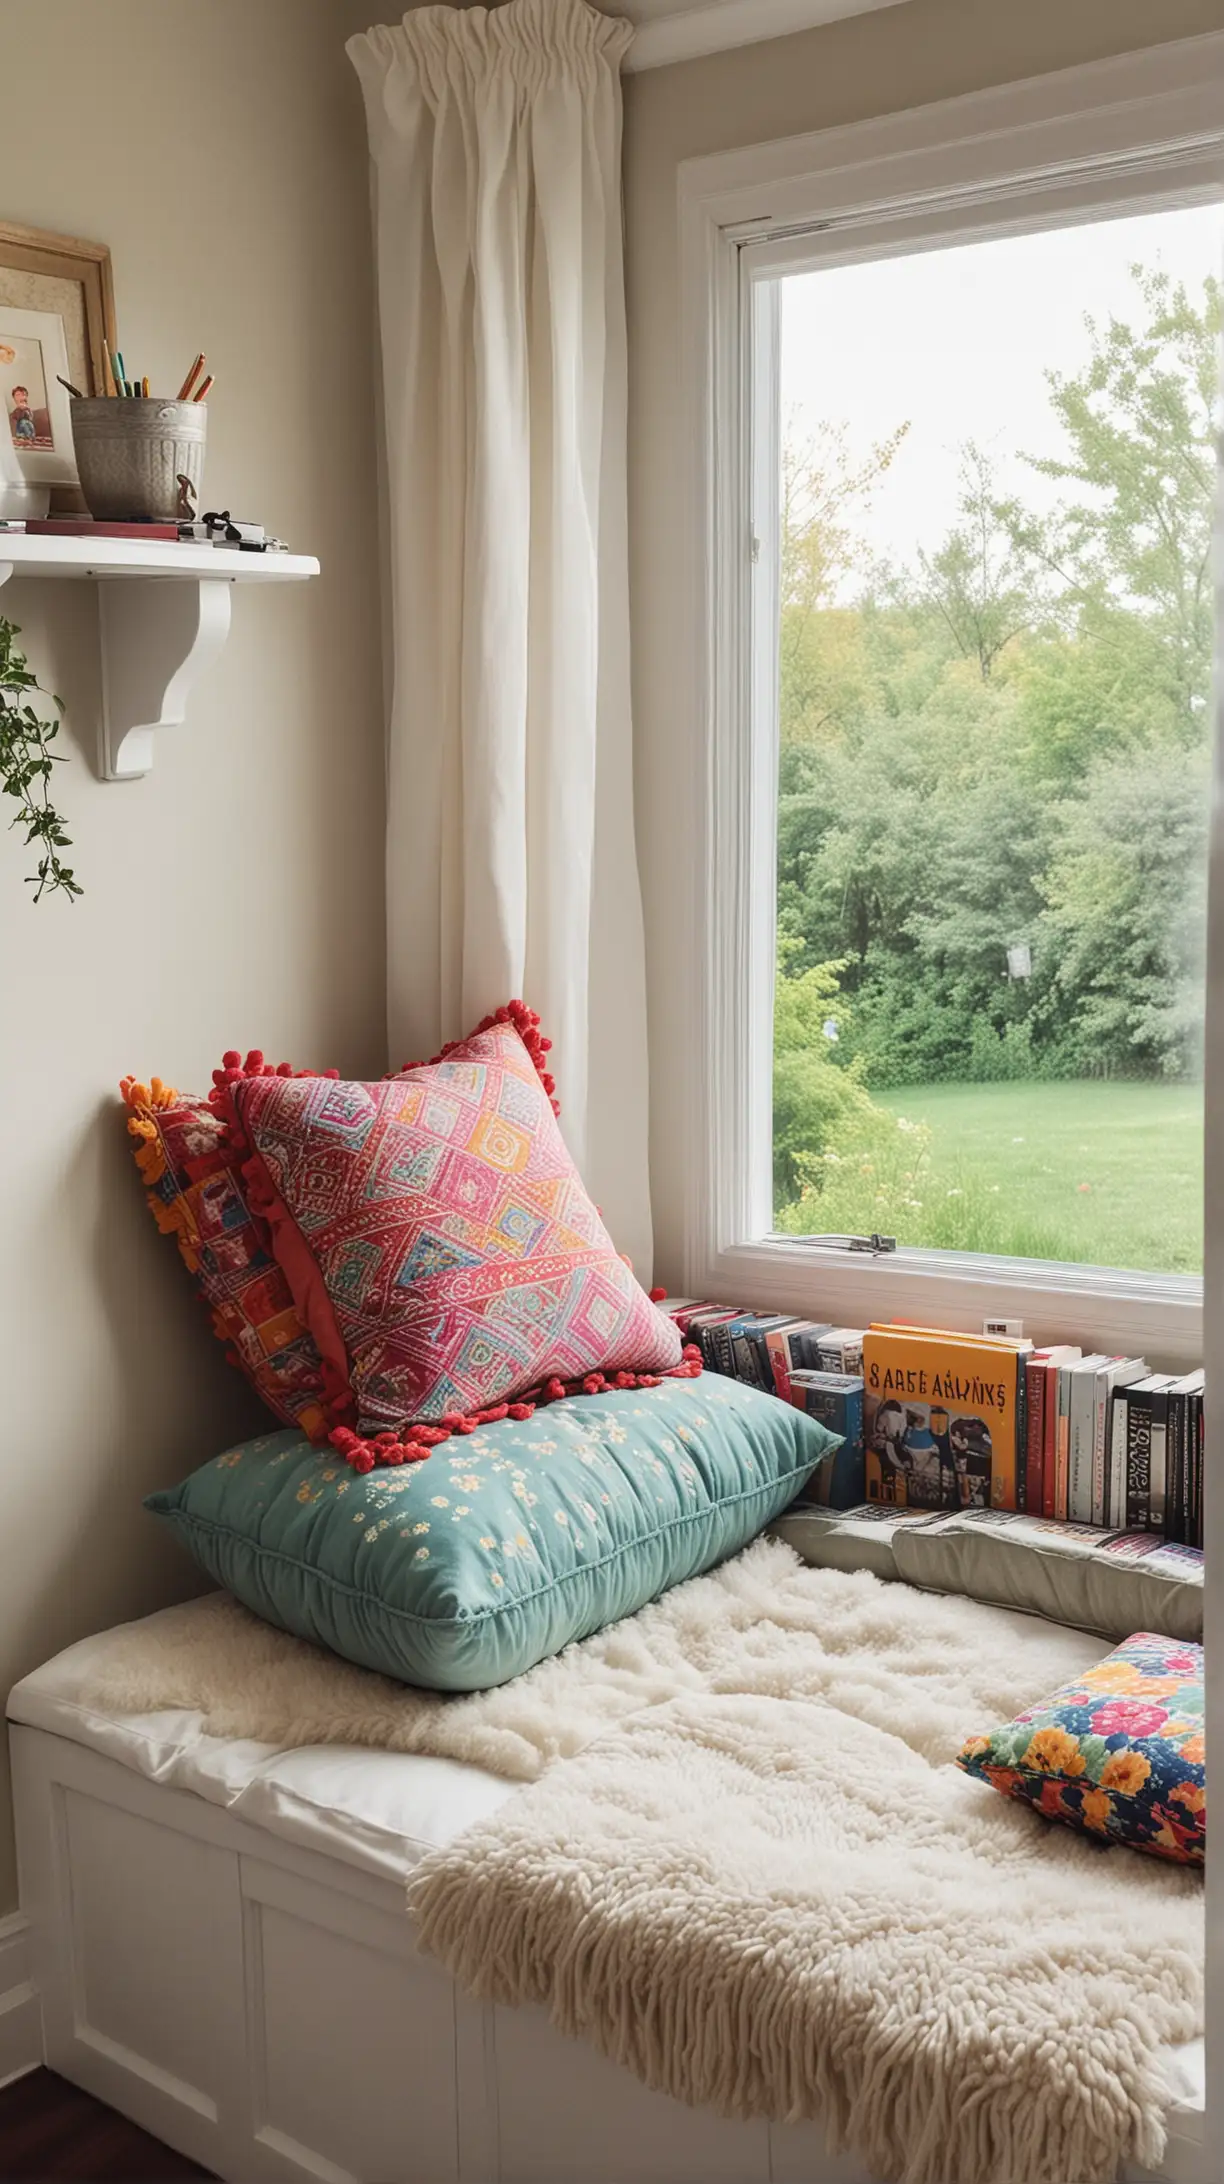 Create picture for Cozy Reading Nook Ideas and make sure it should be attractive and realistic. Make sure that every single object in the picture should be clear means full overview of the idea not a single object. Here's the idea to create the picture [Window Seat Wonderland  I've turned my window seat into the ultimate reading nook. It's flooded with natural light, making it perfect for afternoon reading.   The seat is decked out with soft cushions and colorful throw pillows, creating a cozy spot that I just can't resist.]